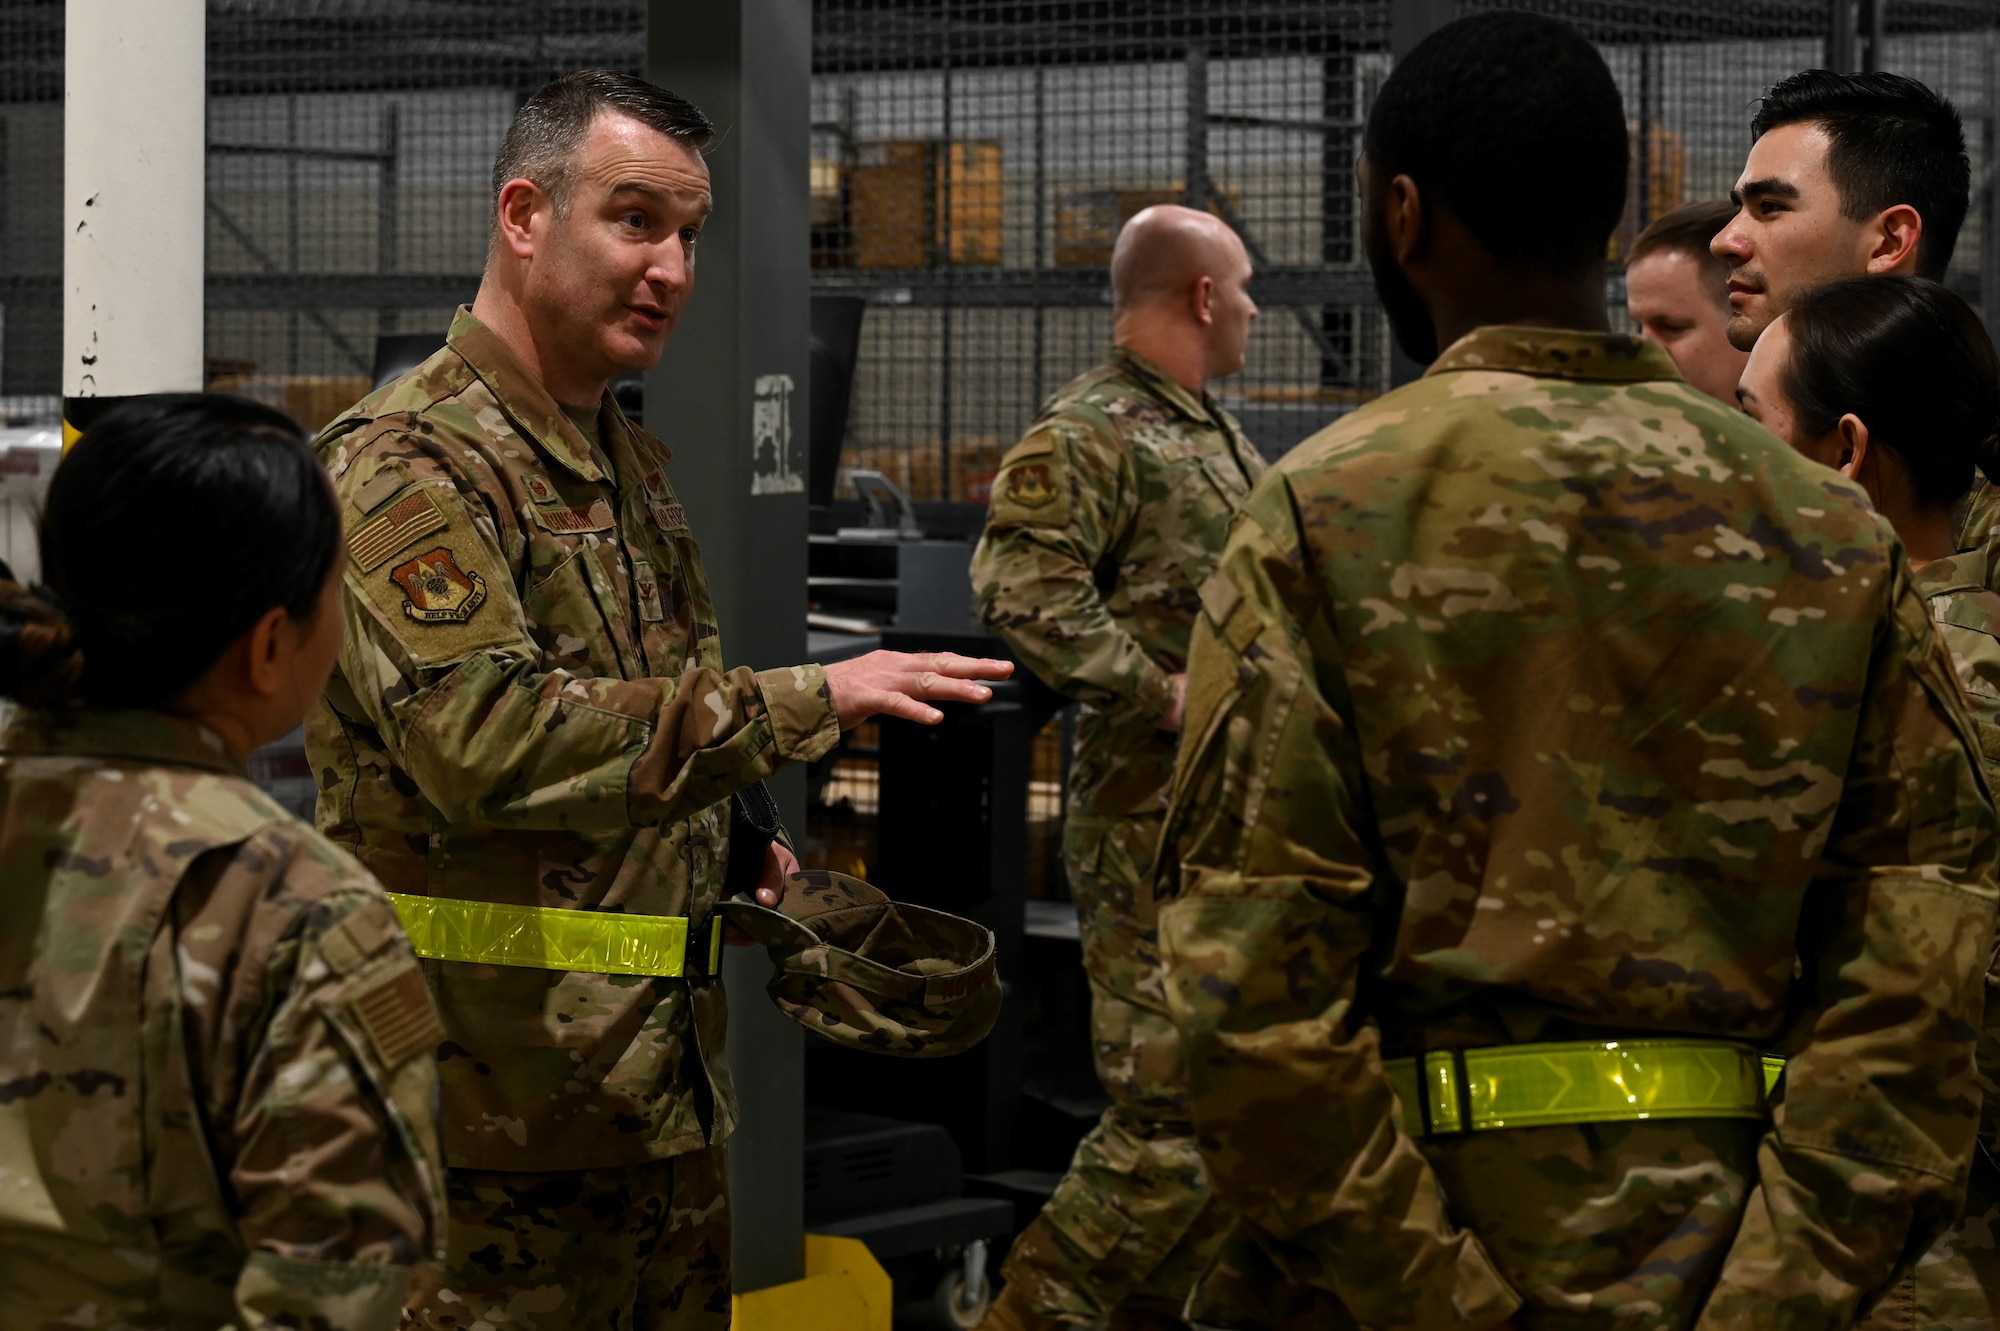 Col. Chris Robinson, 375th Air Mobility Wing commander, interacts with Airmen during a rapid deployment rehearsal on Scott Air Force Base, Illinois, March 16, 2022. This deployment mobility rehearsal emphasizes readiness of command and control procedures and continuity of operations in a simulated contested environment. (U.S. Air Force photo by Airman 1st Class Mark Sulaica)